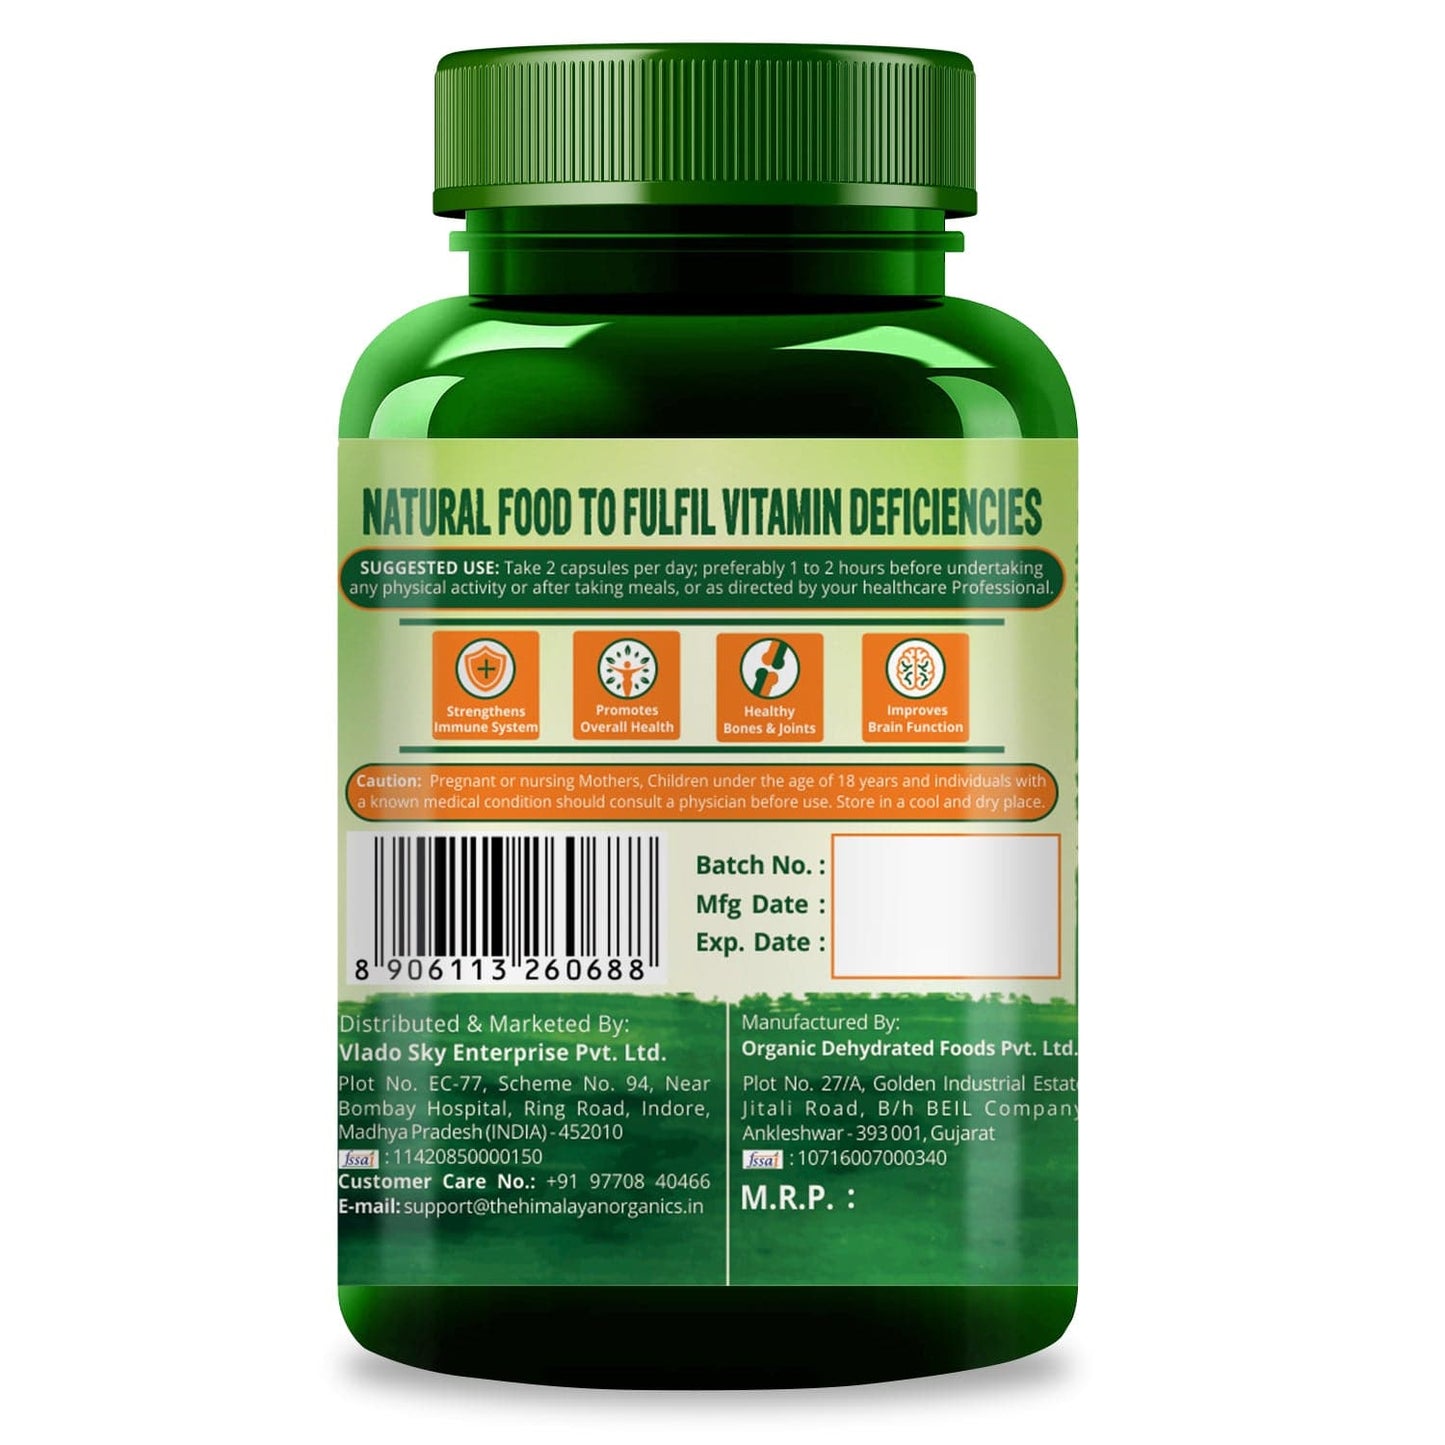 Himalayan Organics Plant Based Multivitamin with 60+ Extracts- 60 Vegetarian Capsules